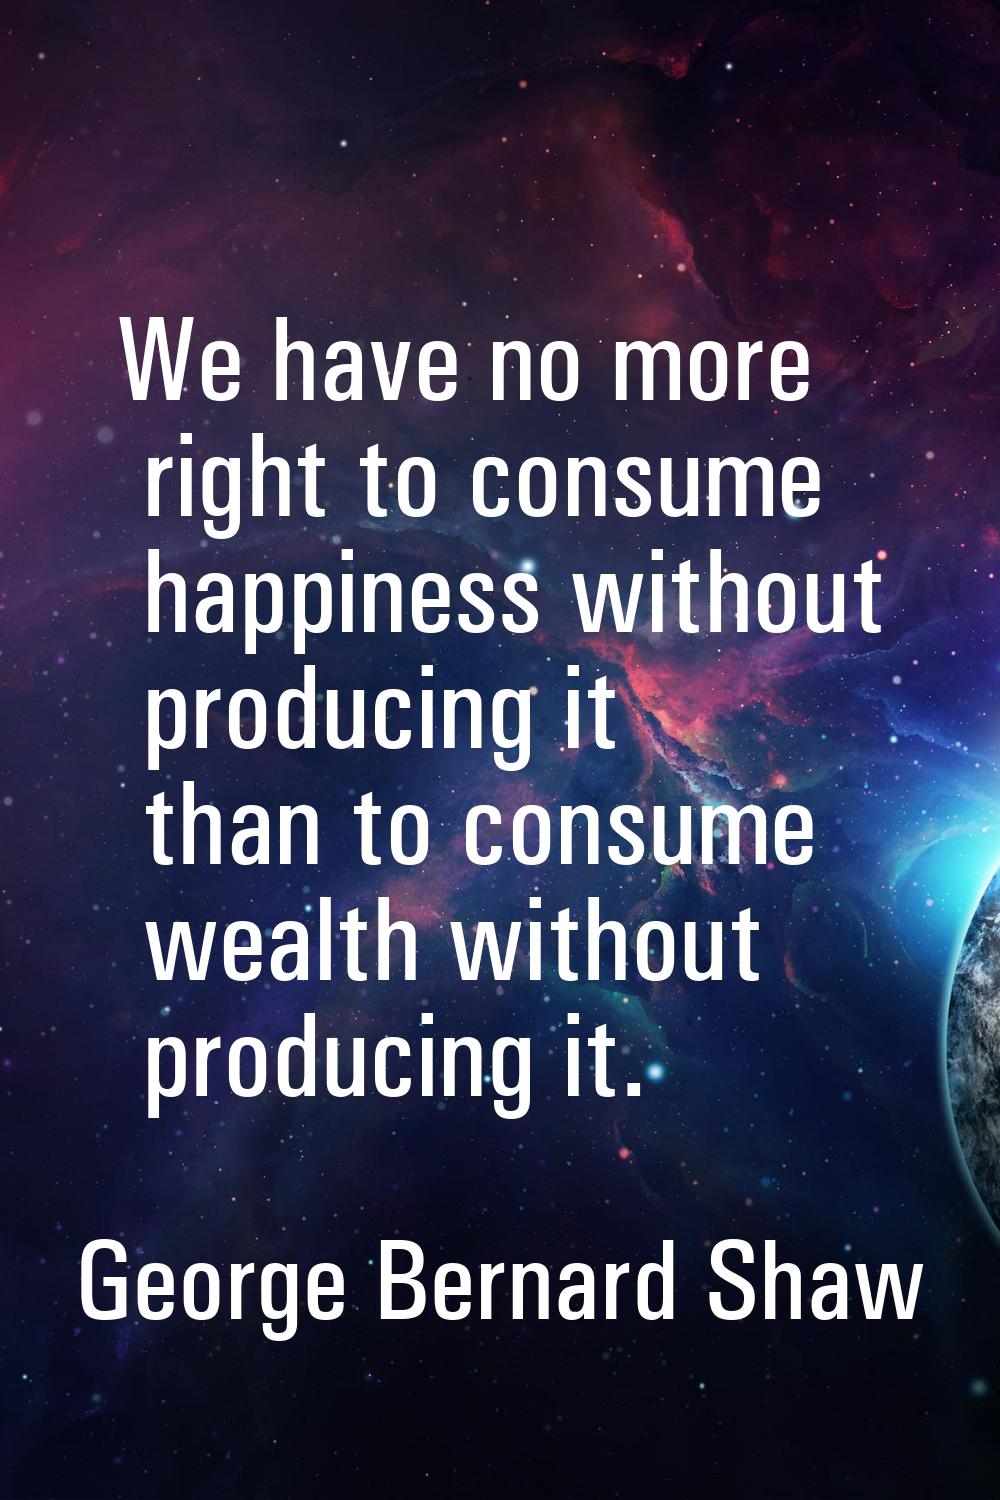 We have no more right to consume happiness without producing it than to consume wealth without prod